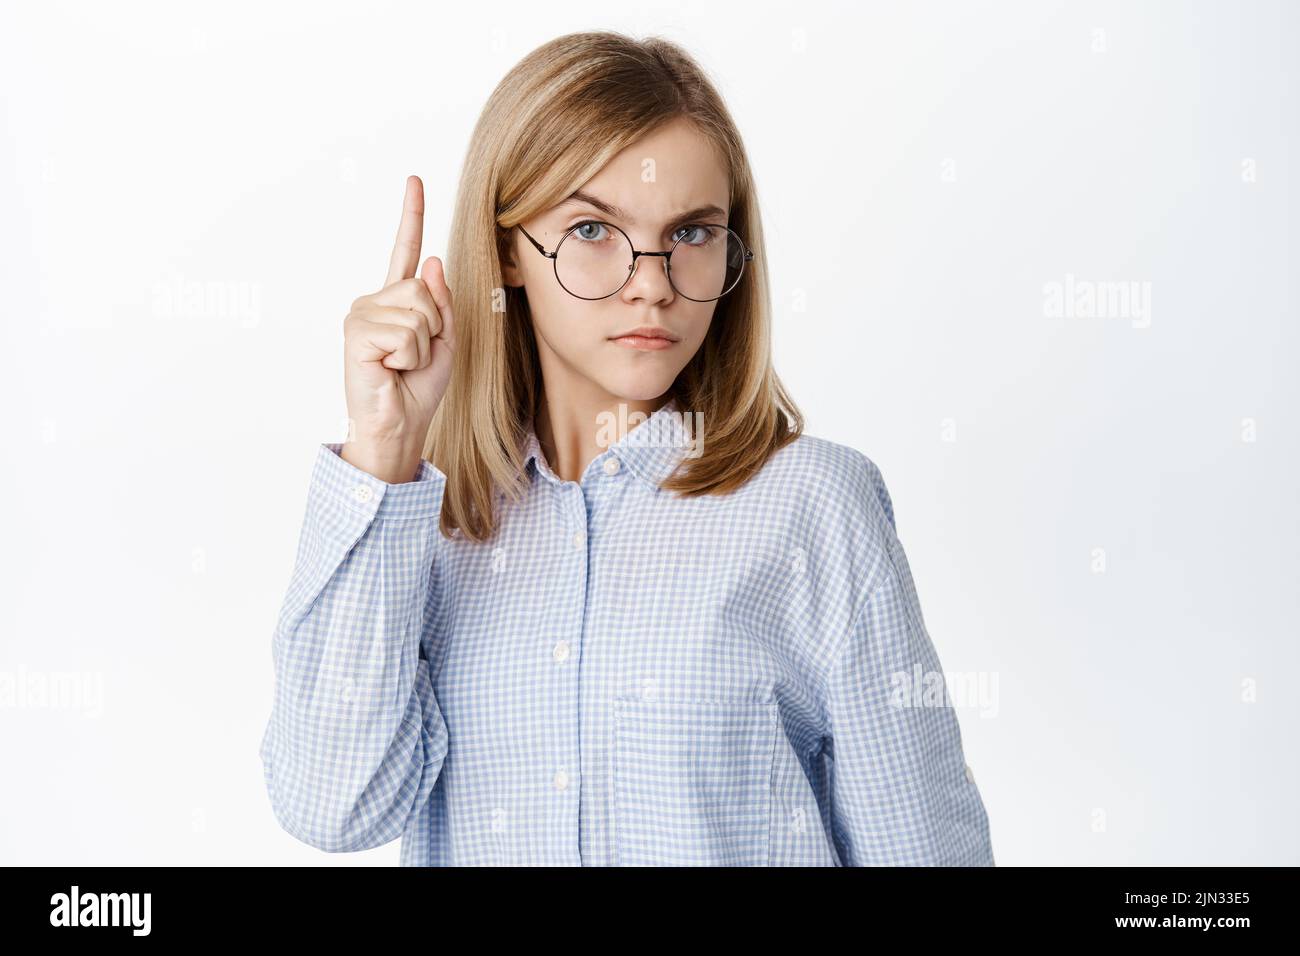 Smart cute little kid, girl in glasses raising one finger up, looking thoughtful and clever, standing over white background Stock Photo